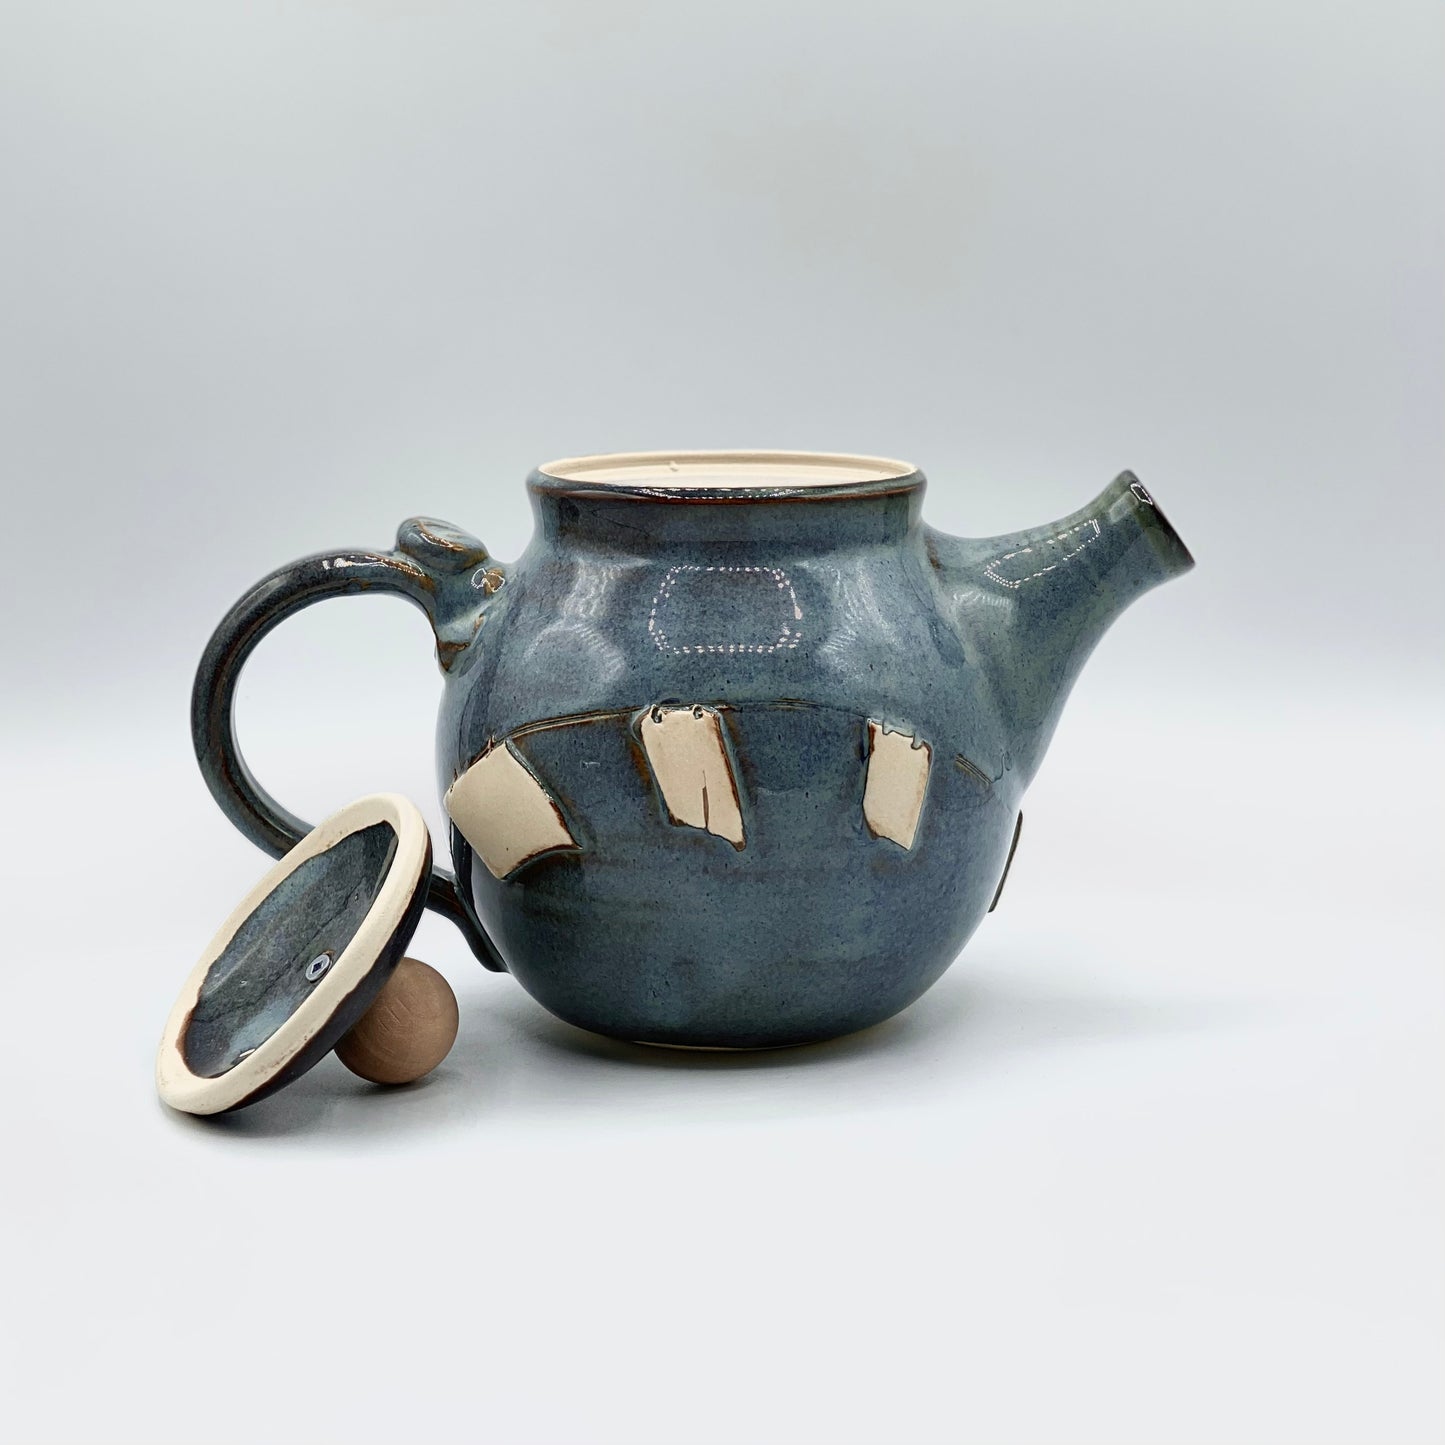 Clothesline Teapot by Ginette Arsenault